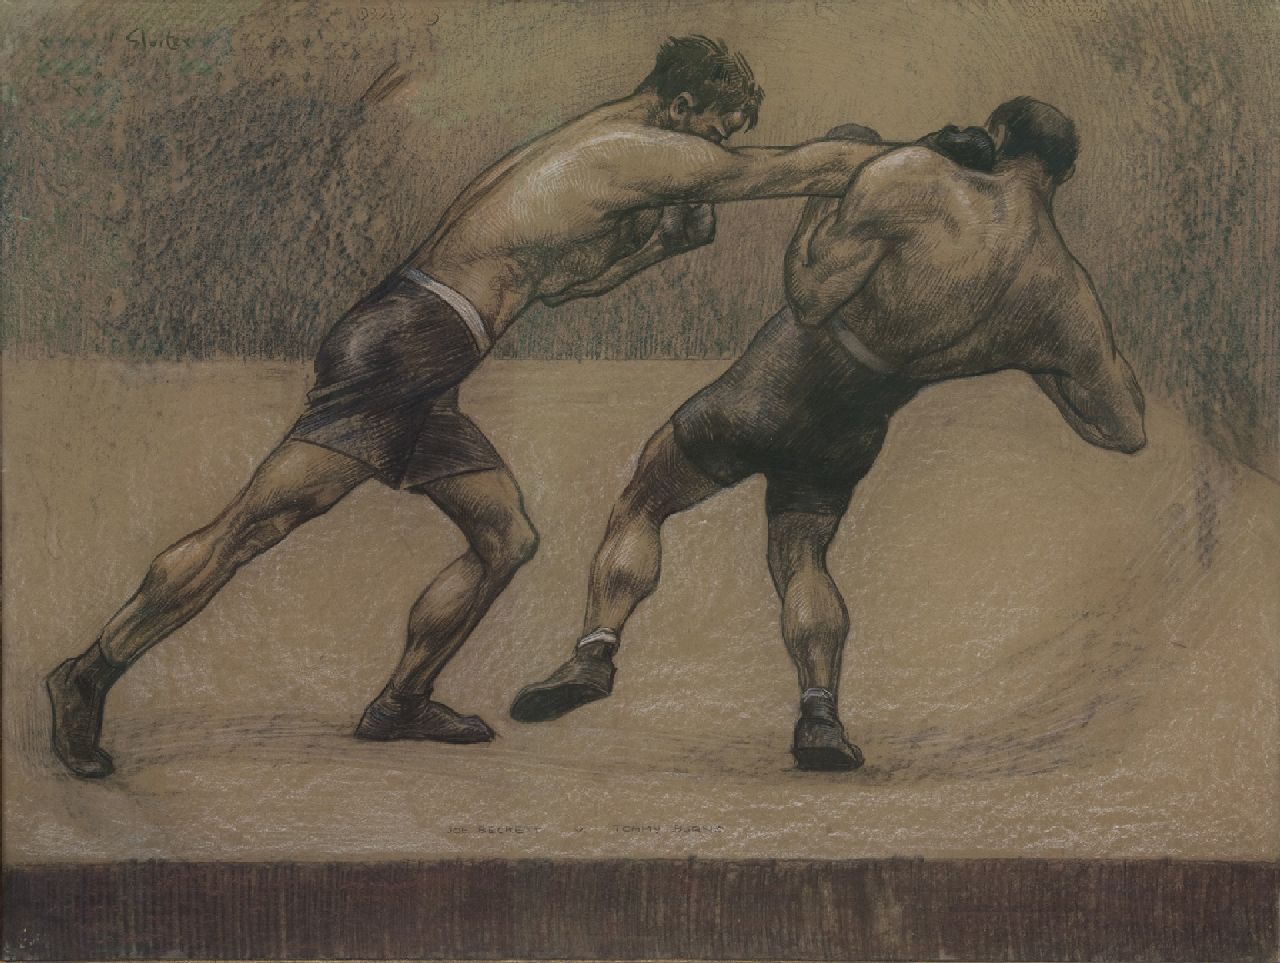 Sluiter J.W.  | Jan Willem 'Willy' Sluiter, Joe Beckett's fight against Tommy Burns, London 1920, charcoal and pastel on paper laid down on cardboard 74.3 x 99.0 cm, signed c.r. and dated 'London 1920'